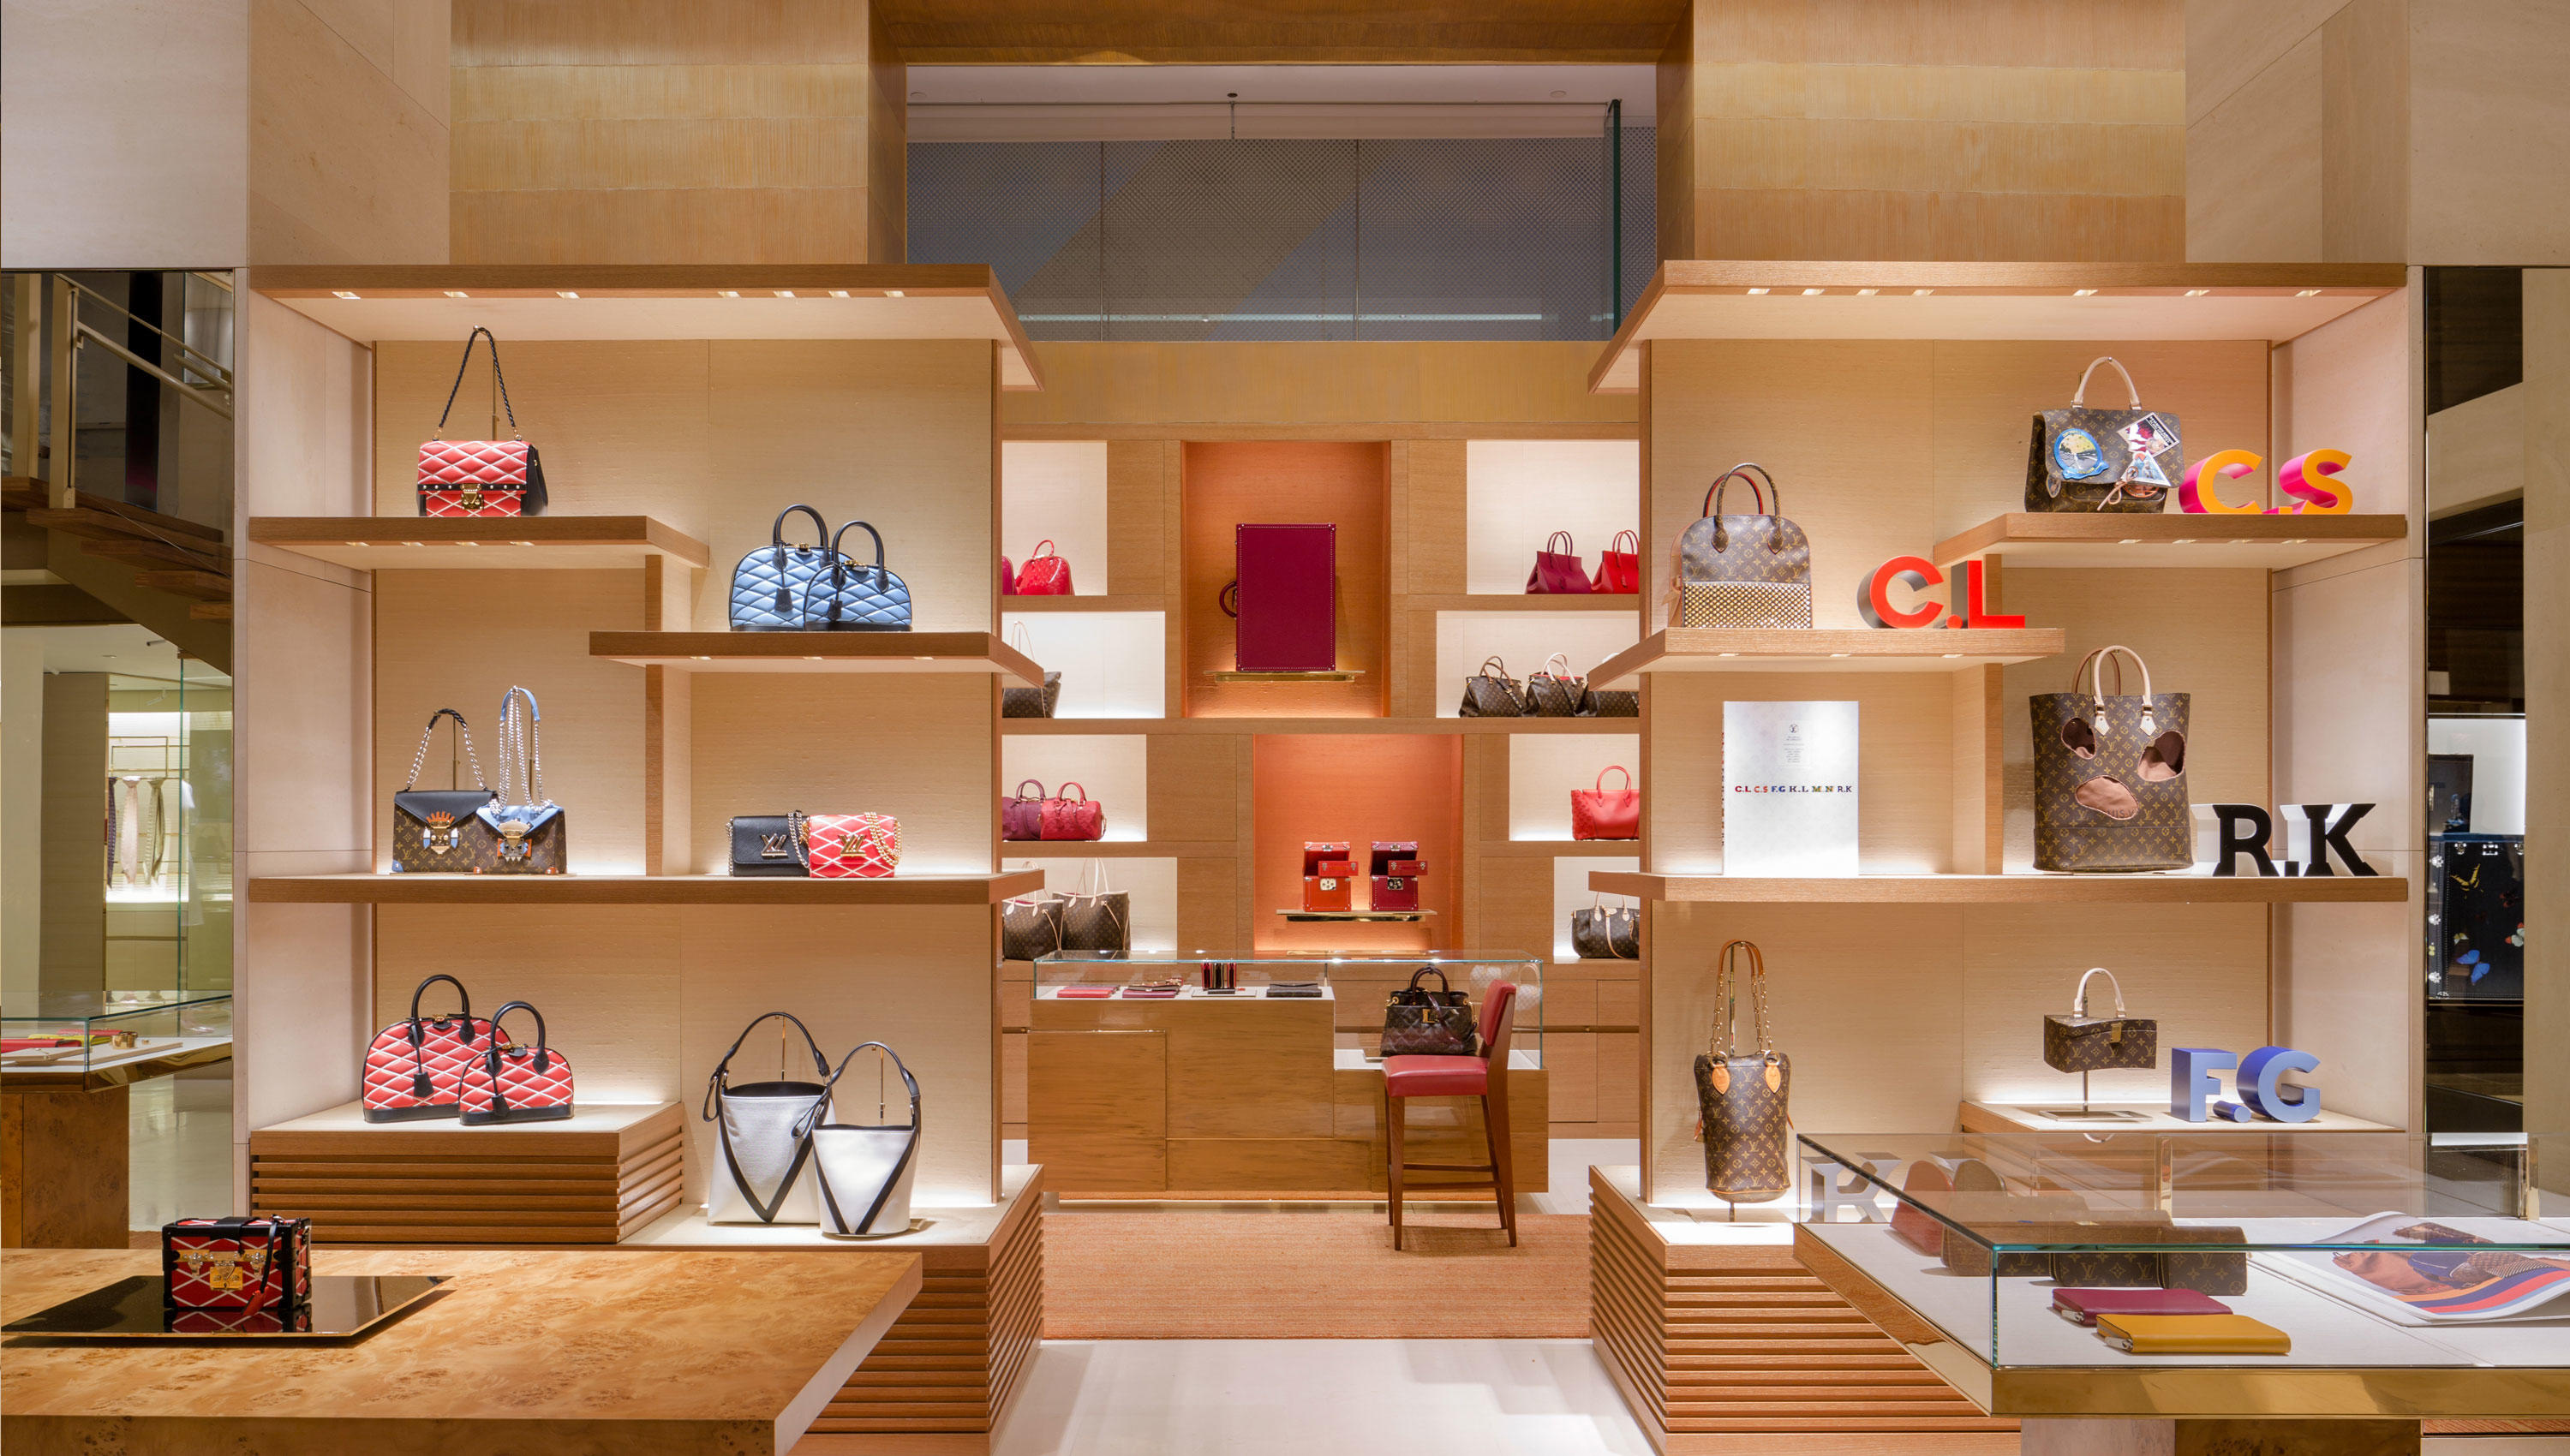 Louis Vuitton East 57th Street New York Ny | Confederated Tribes of the Umatilla Indian Reservation